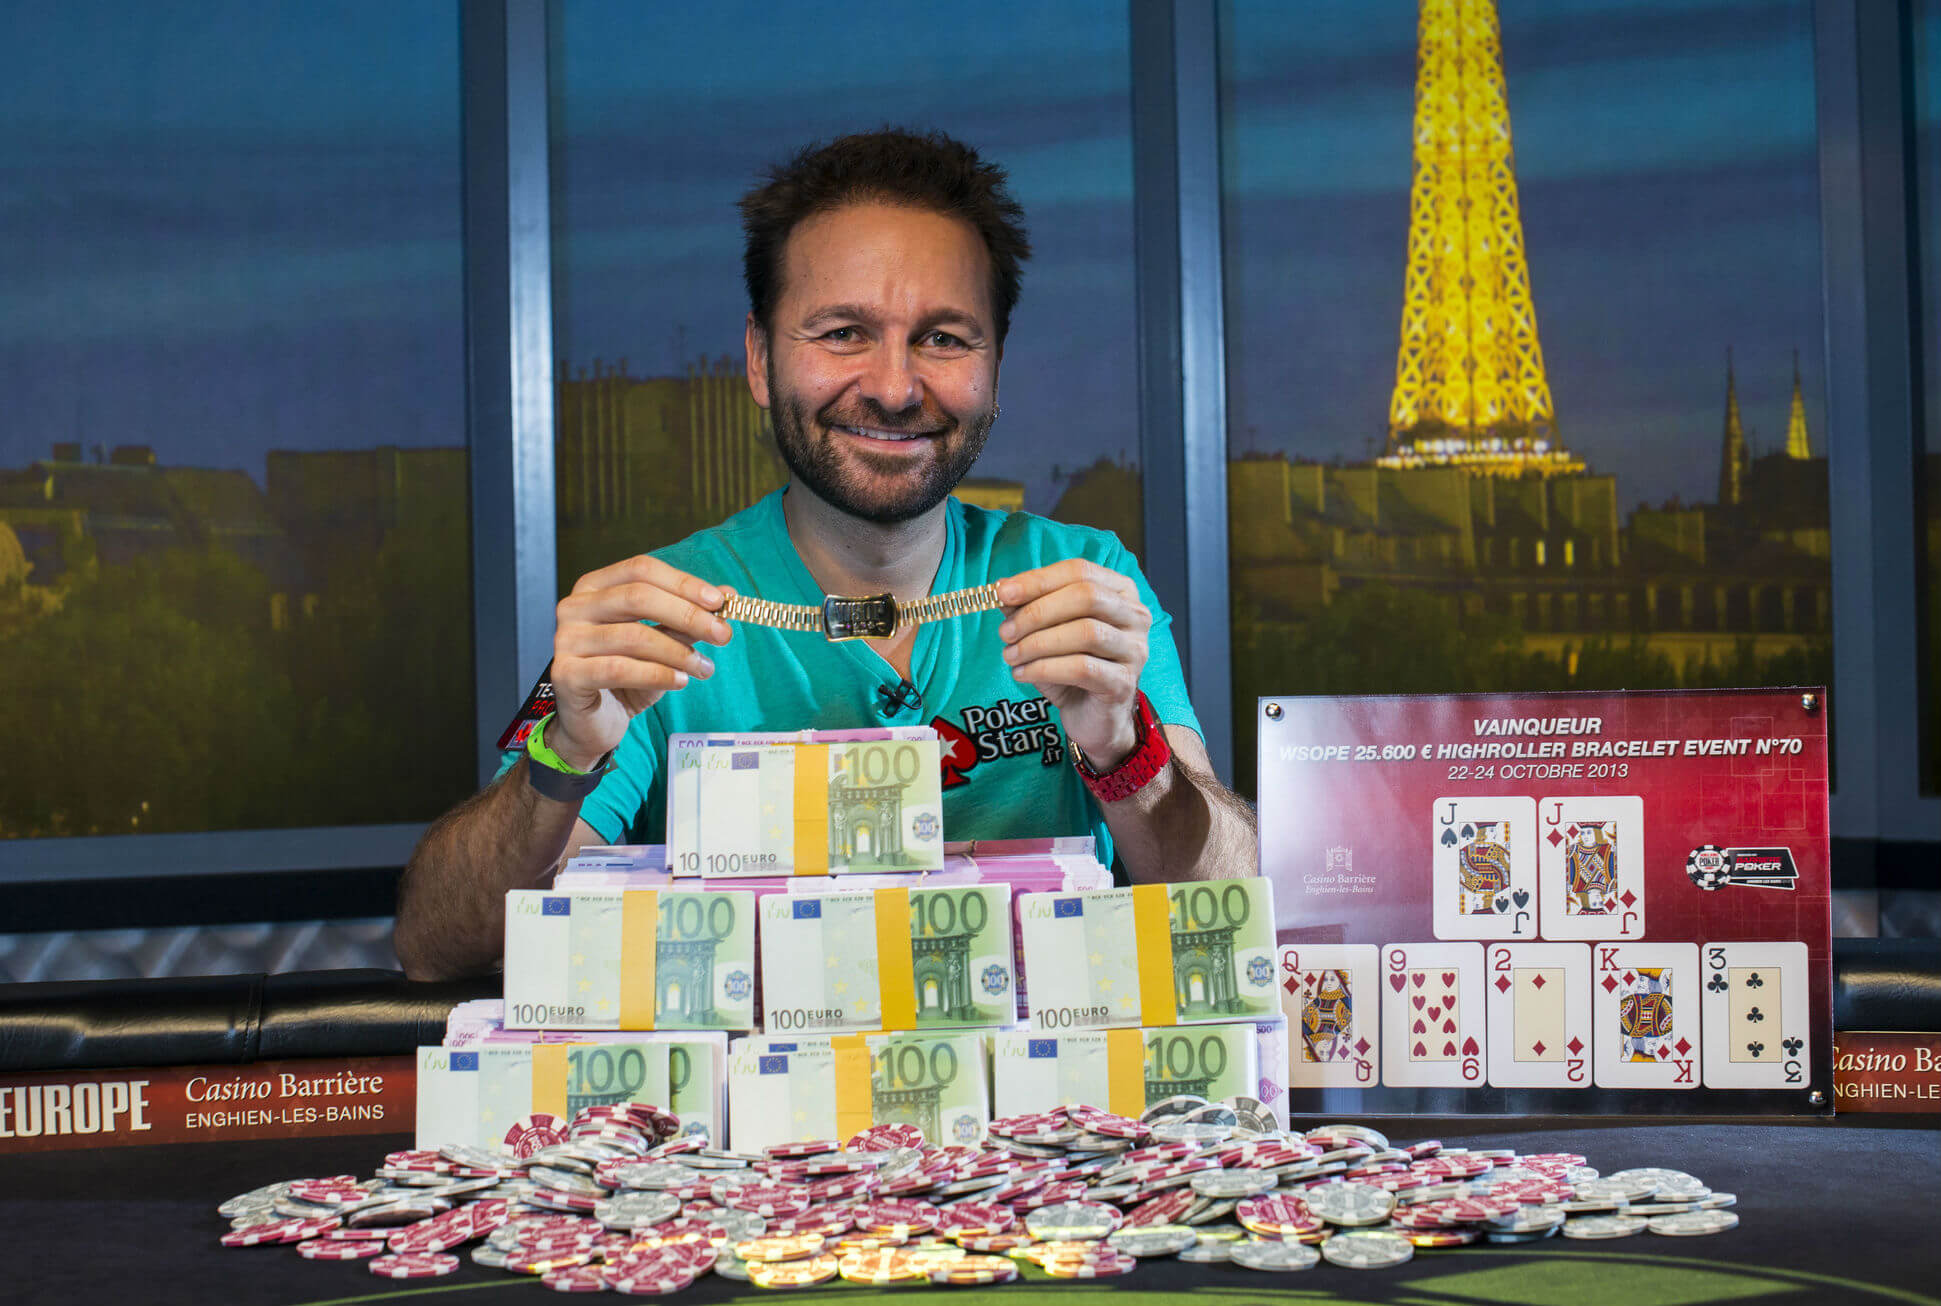 Daniel Negreanu is willing to bet $1,000,000 that he wins a bracelet at this year's WSOP